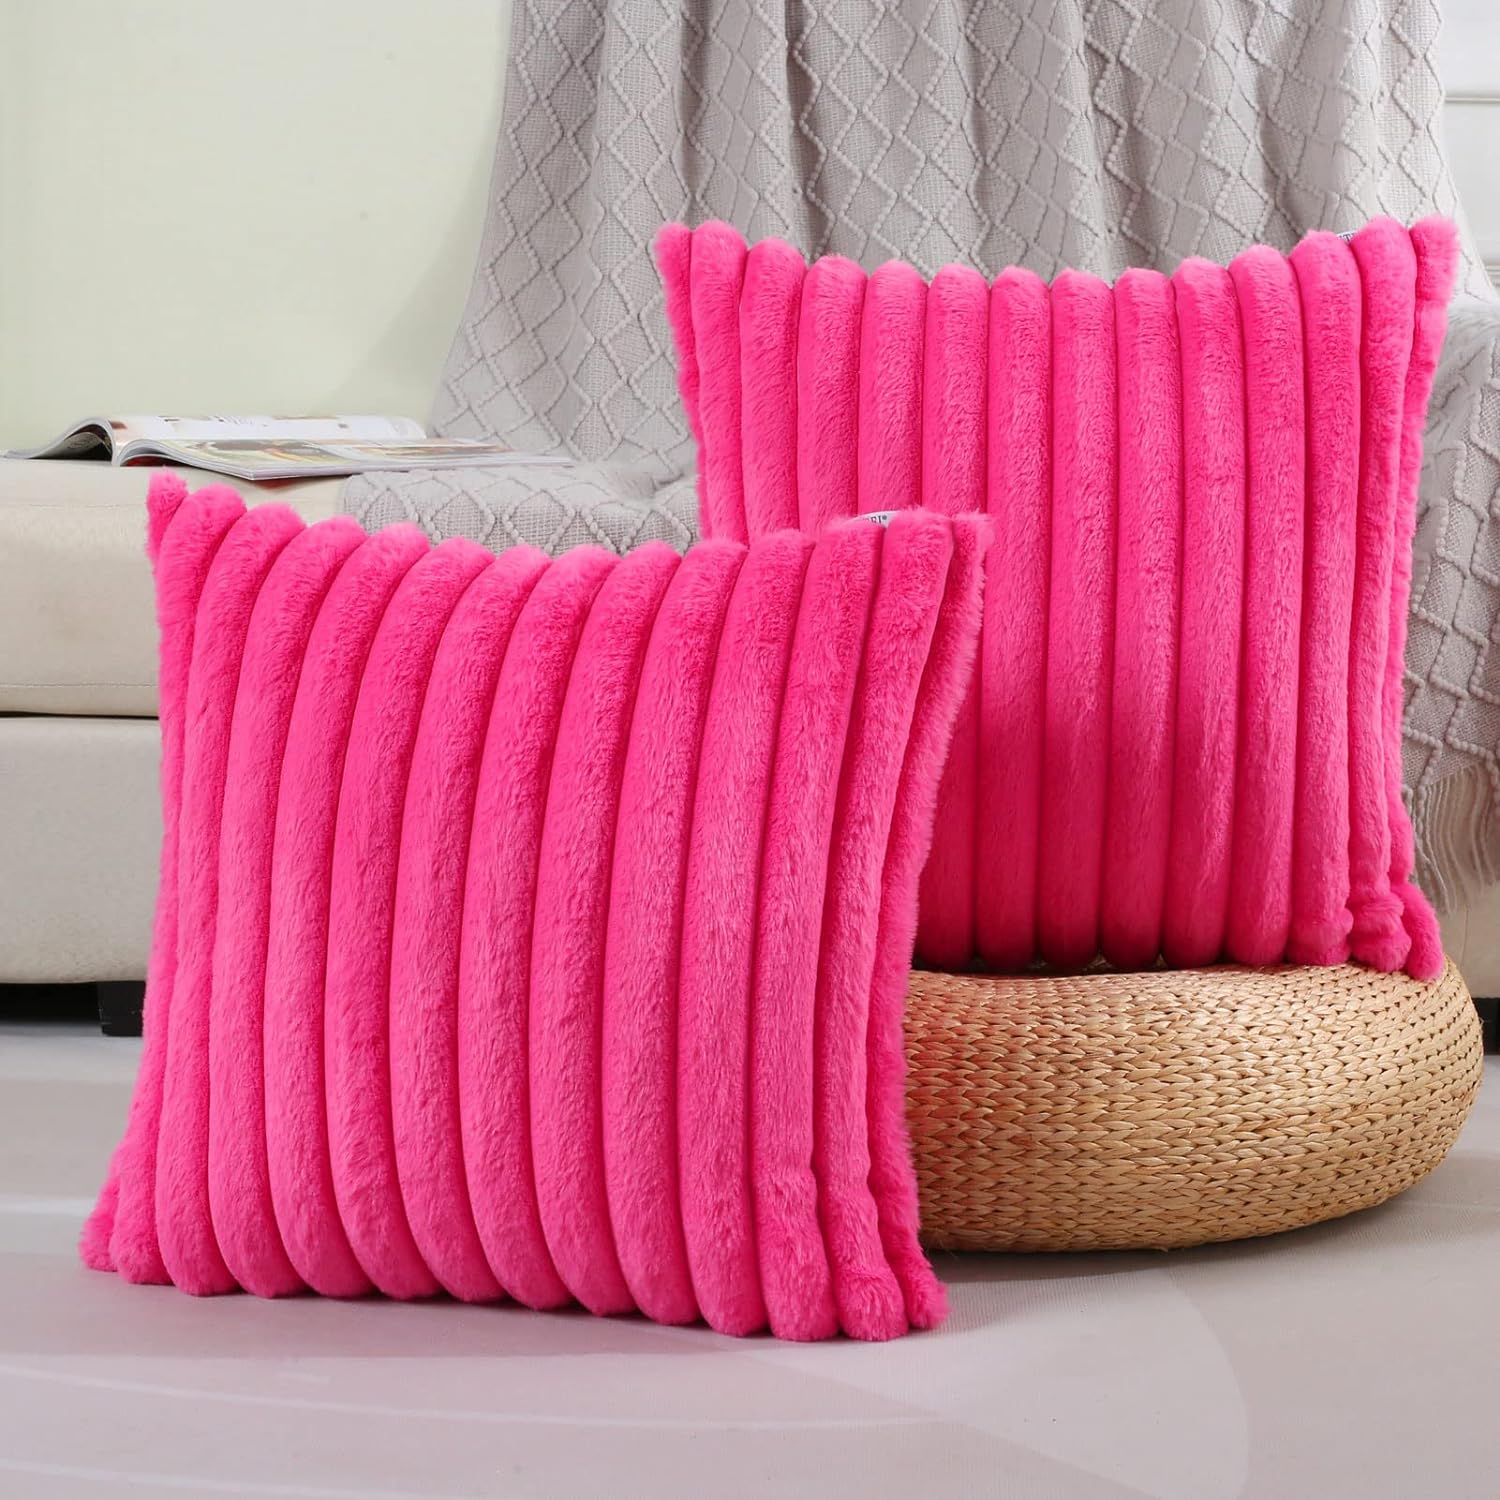 FUTEI Hot Pink Striped Decorative Throw Pillow Covers 18x18 Inch Set of 2,Square Valentines Day Decorations Couch Pillow Case,Soft Cozy Faux Rabbit Fur & Velvet Back,Modern Home Decor for Bed